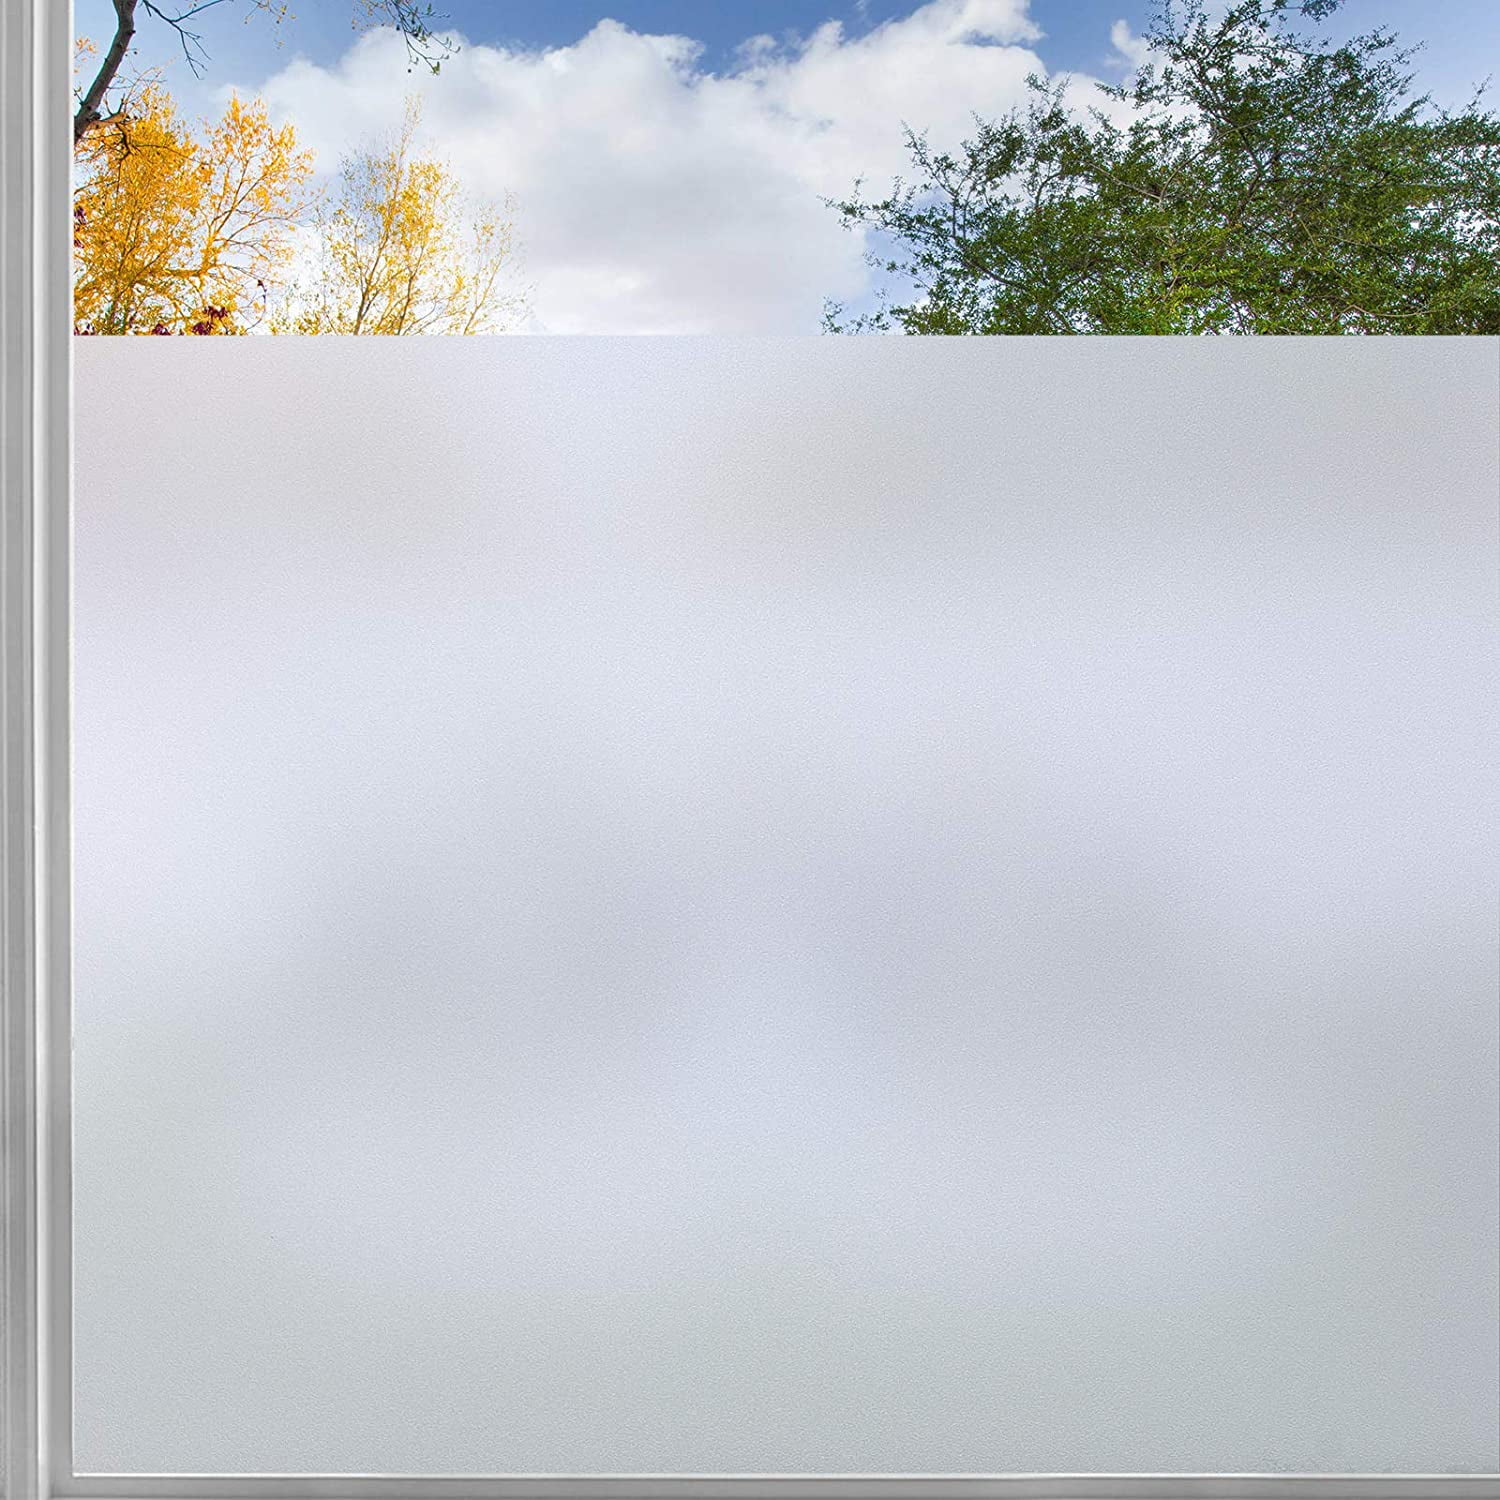 60" X 10 FT ROLL BLACKOUT FILM PRIVACY FOR OFFICE,BATH,GLASS DOORS,STORES,SCHOOL 